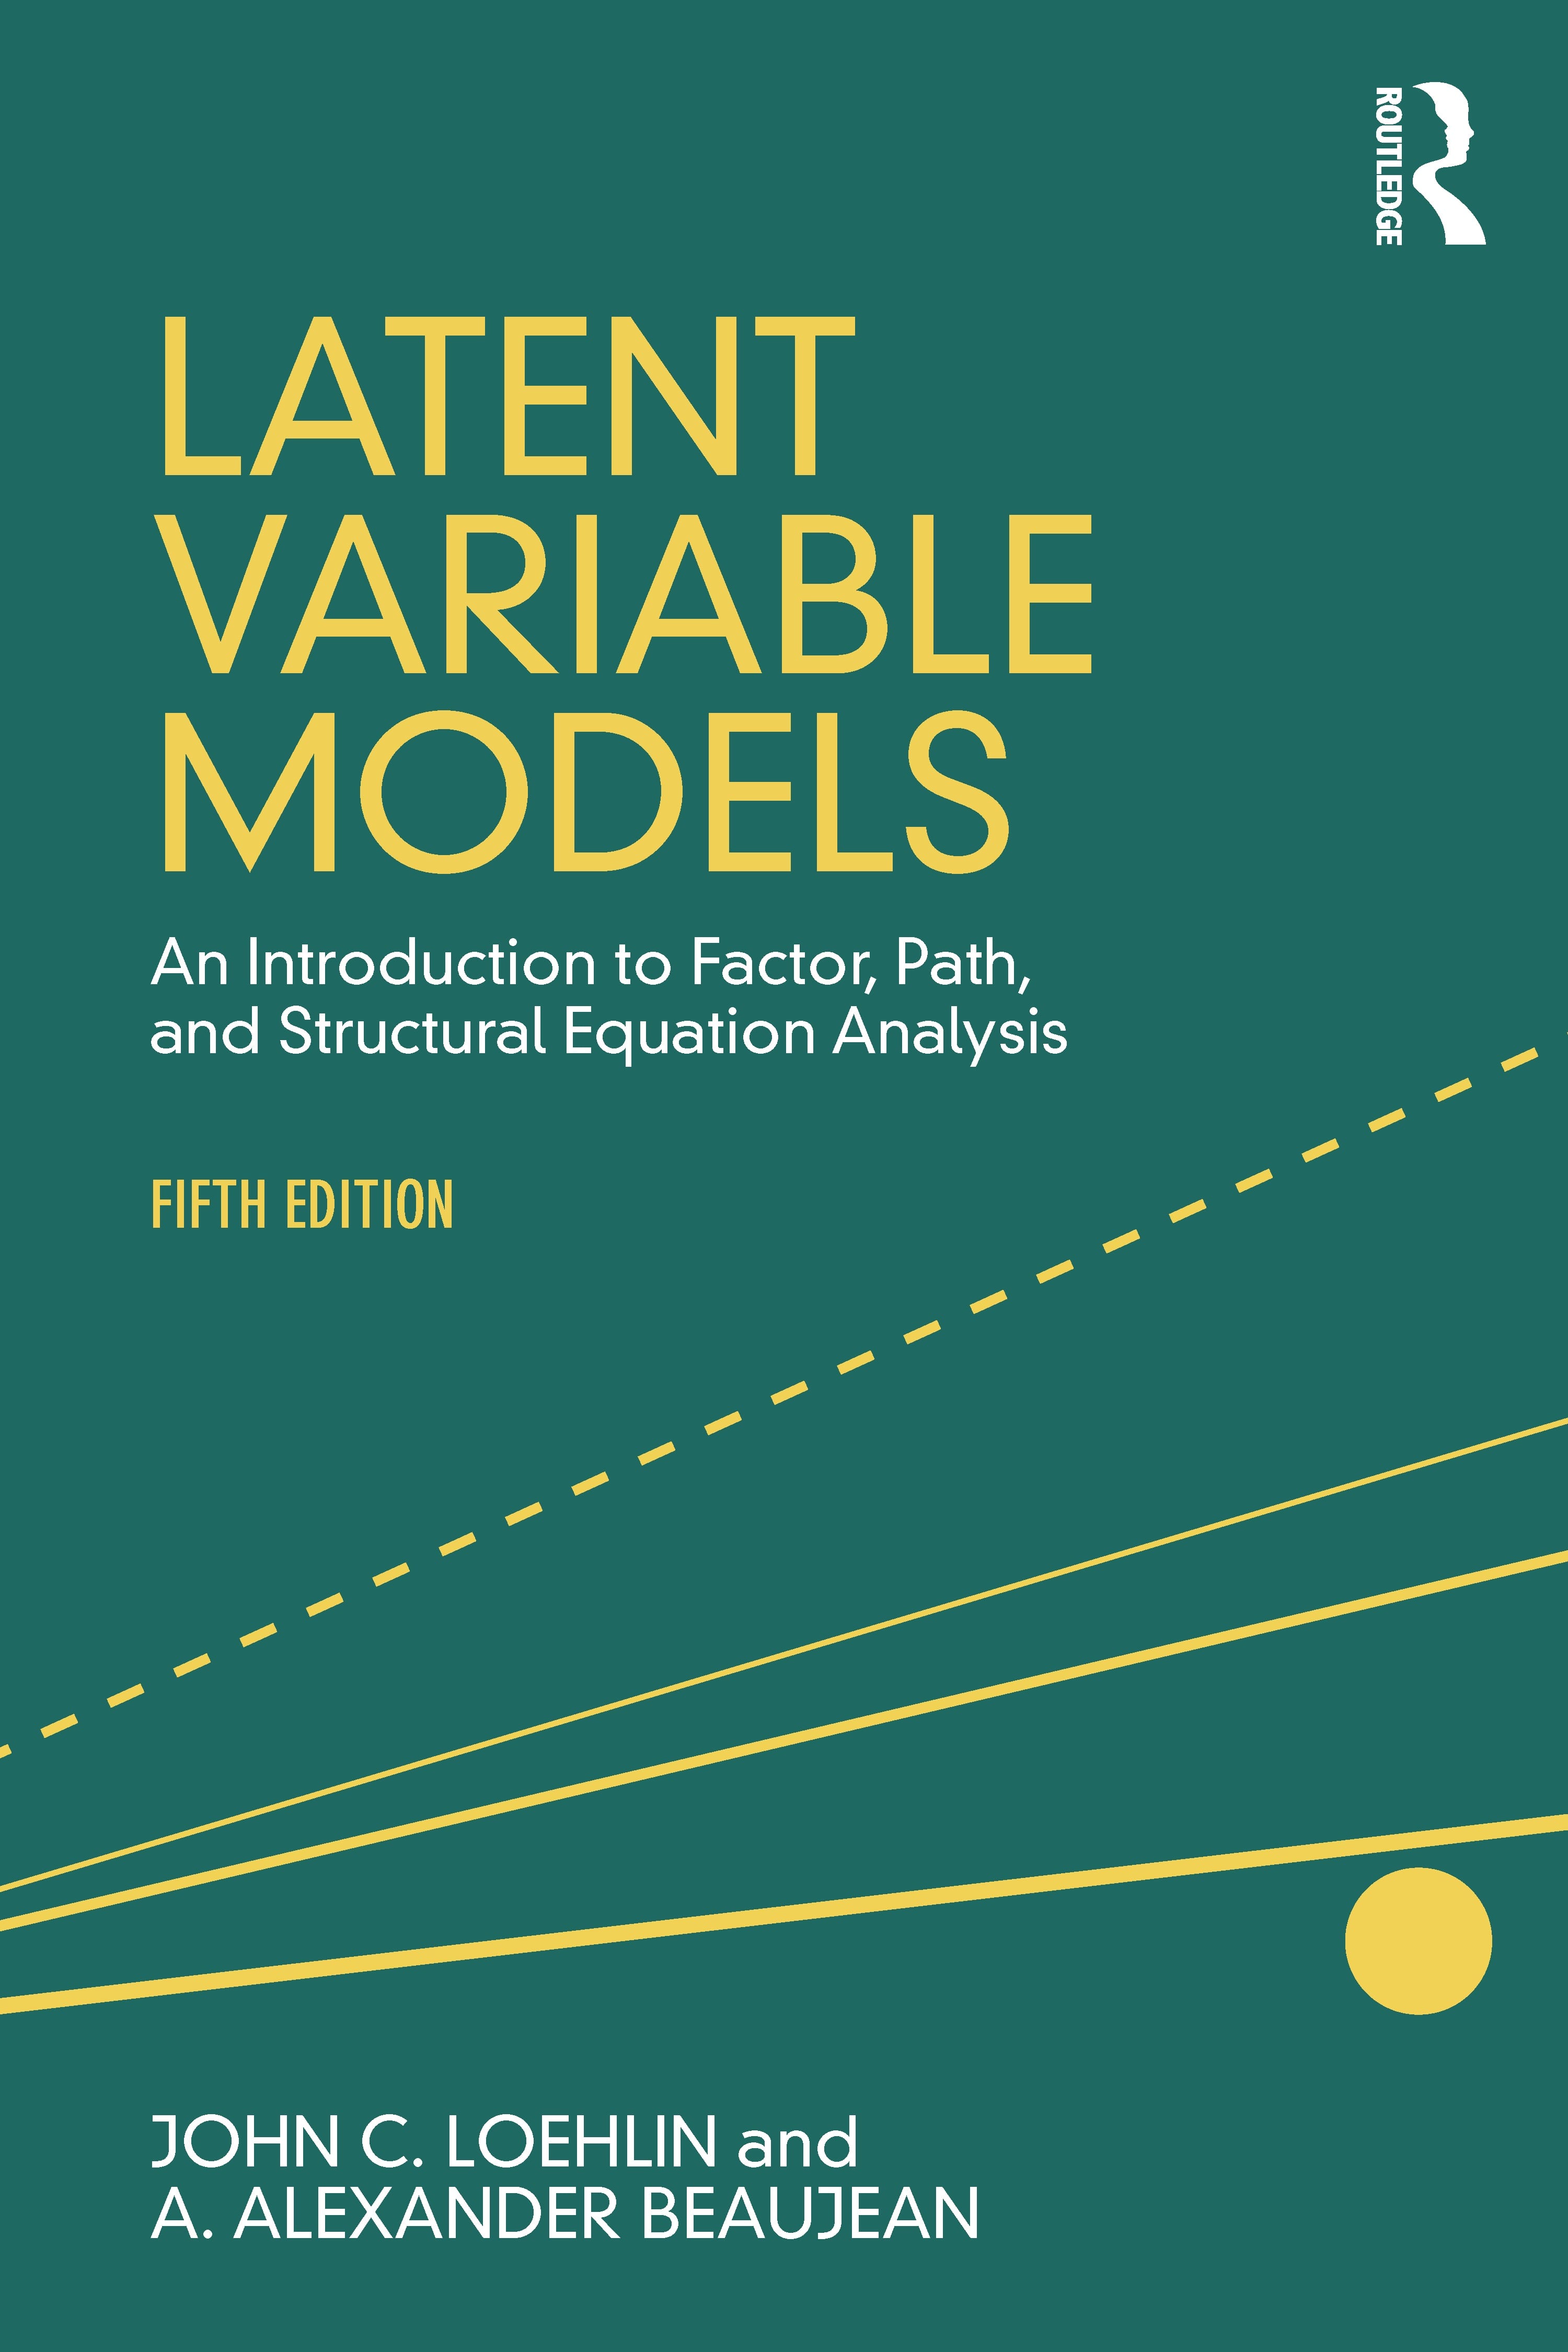 Latent Variable Models (5th Edition) book cover